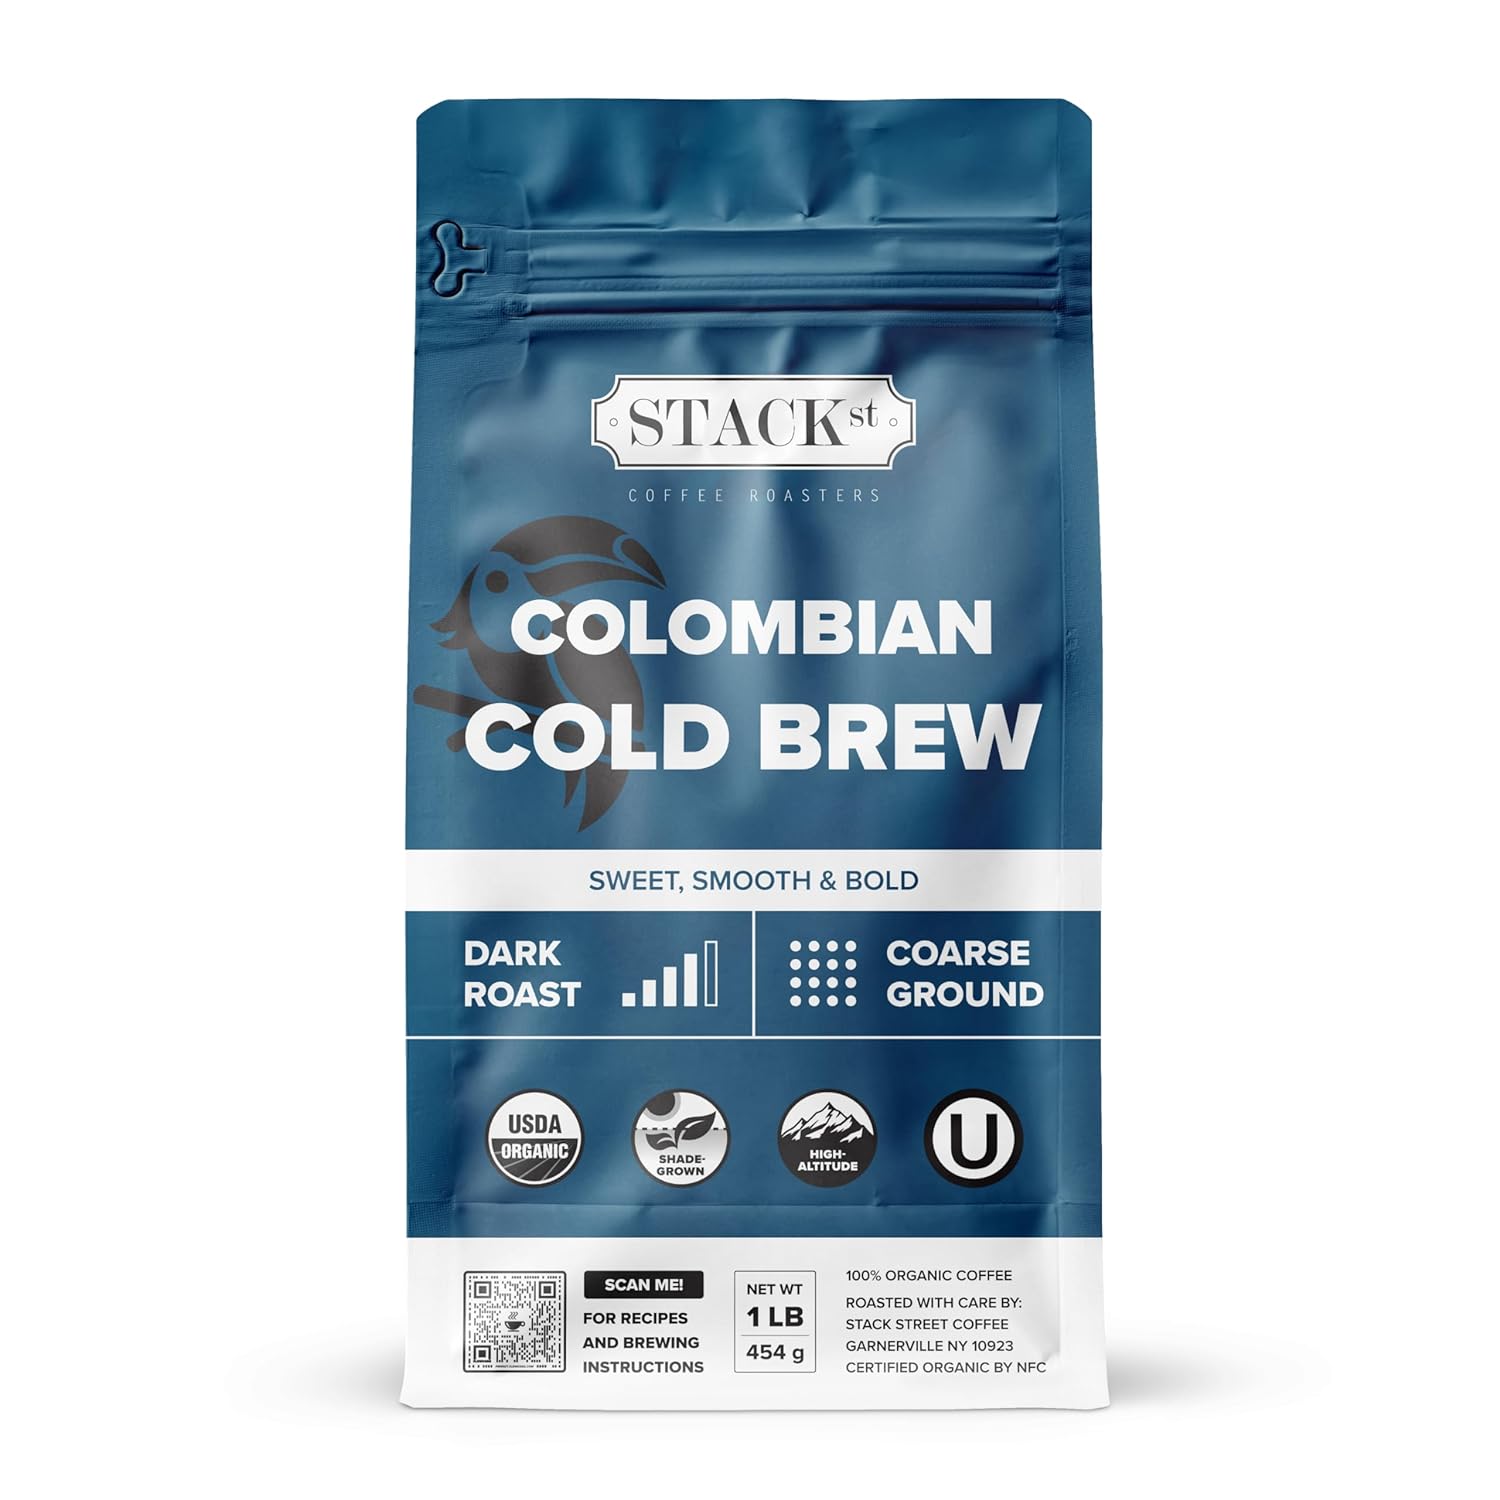 This coffee has a good flavor and makes delicious cold brew coffee. I will buy again.